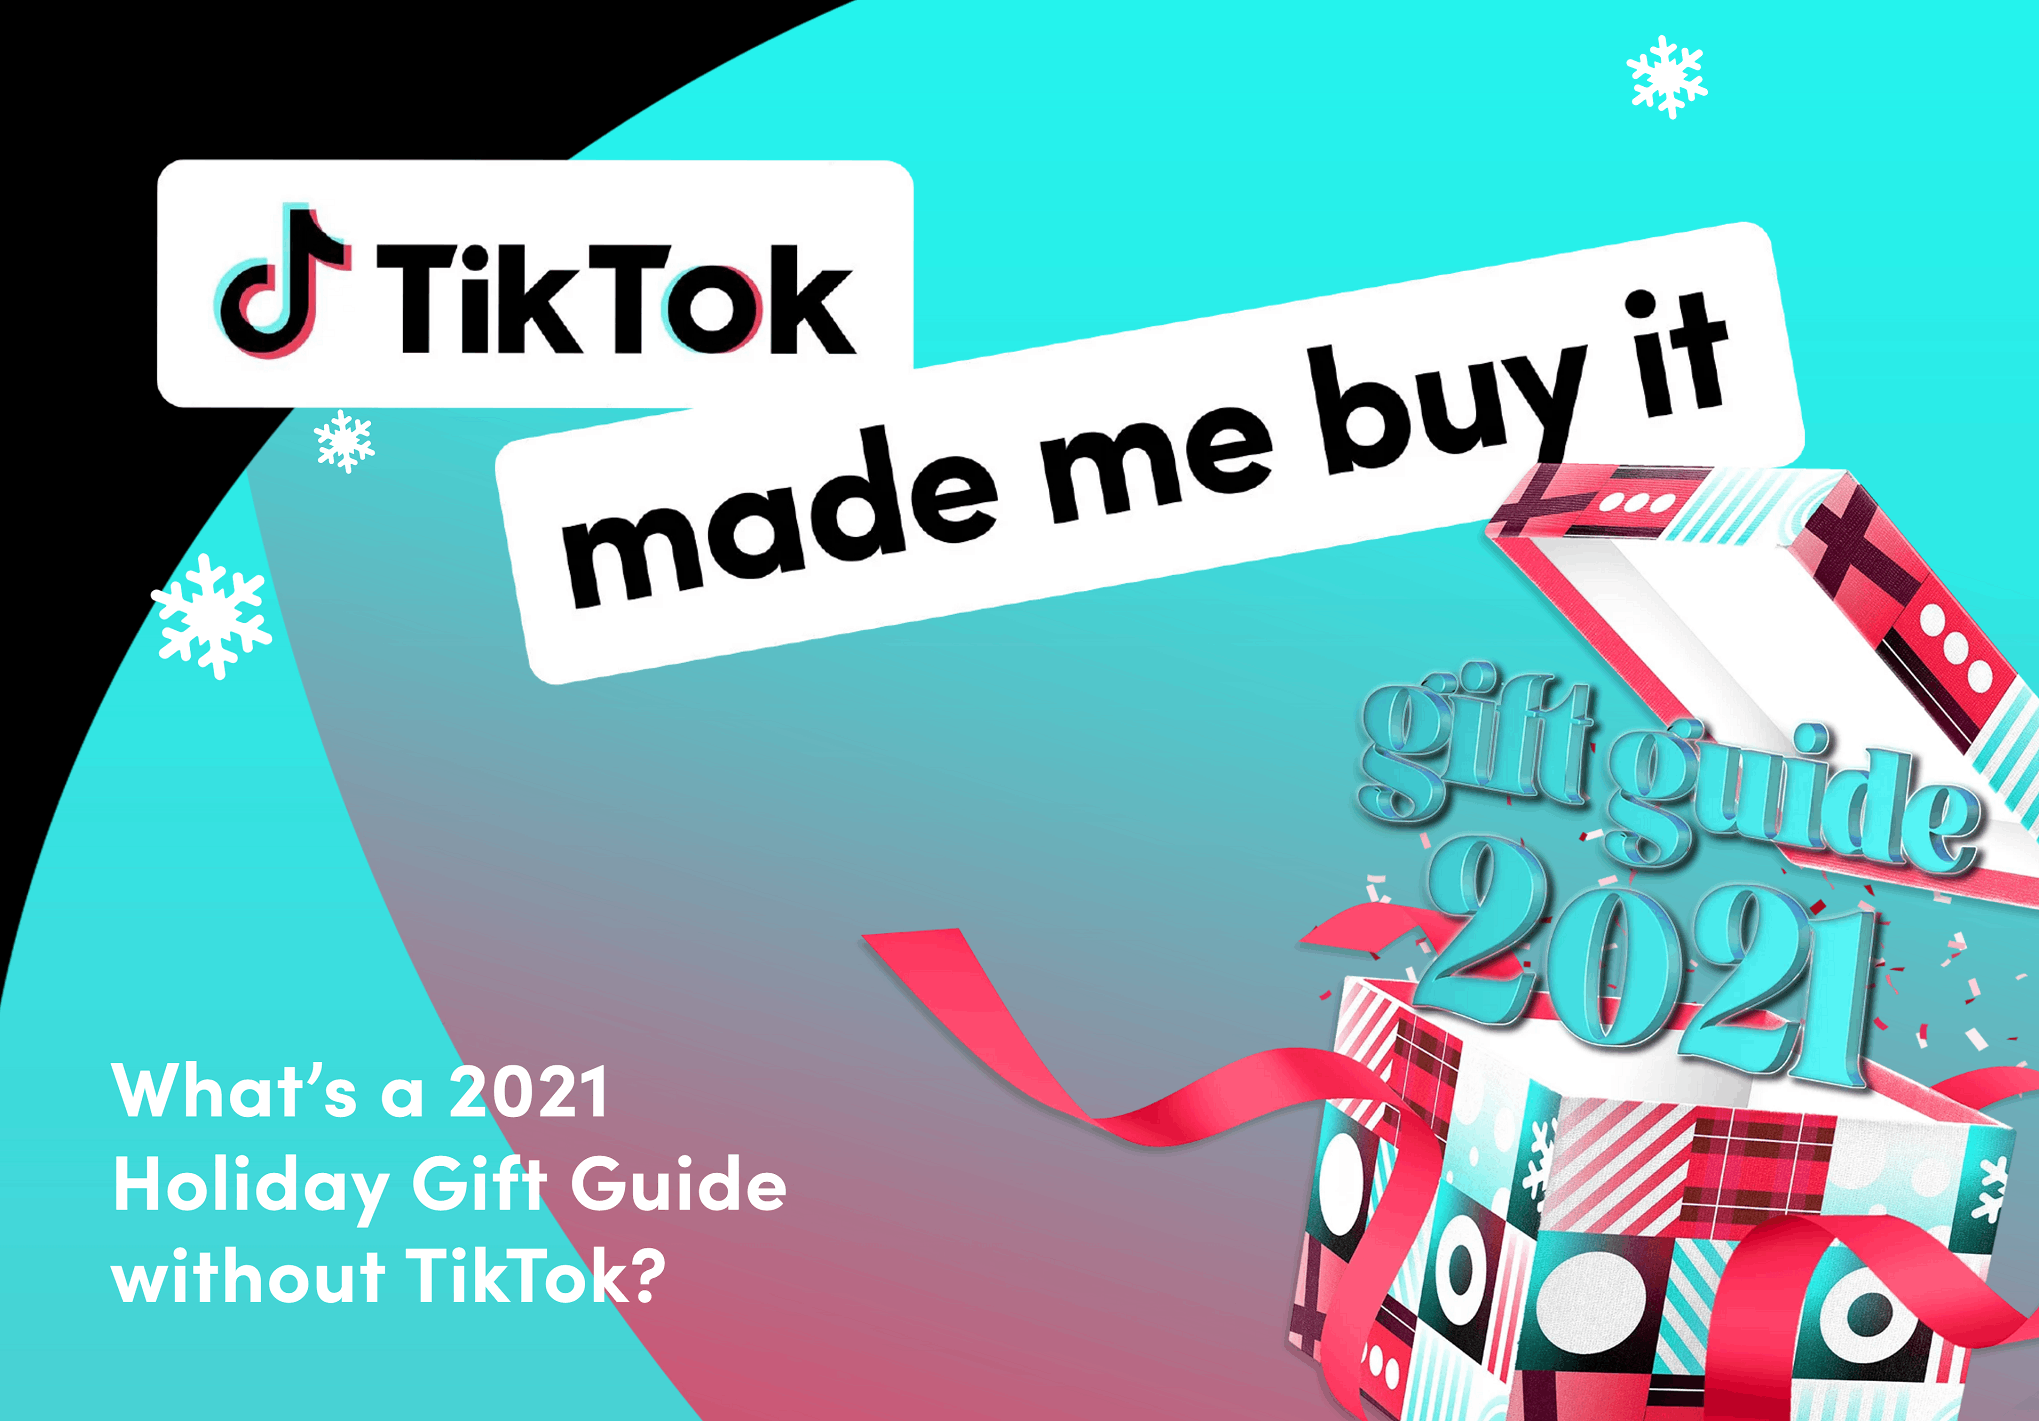 These Are Some of the Most Popular Products on TikTok